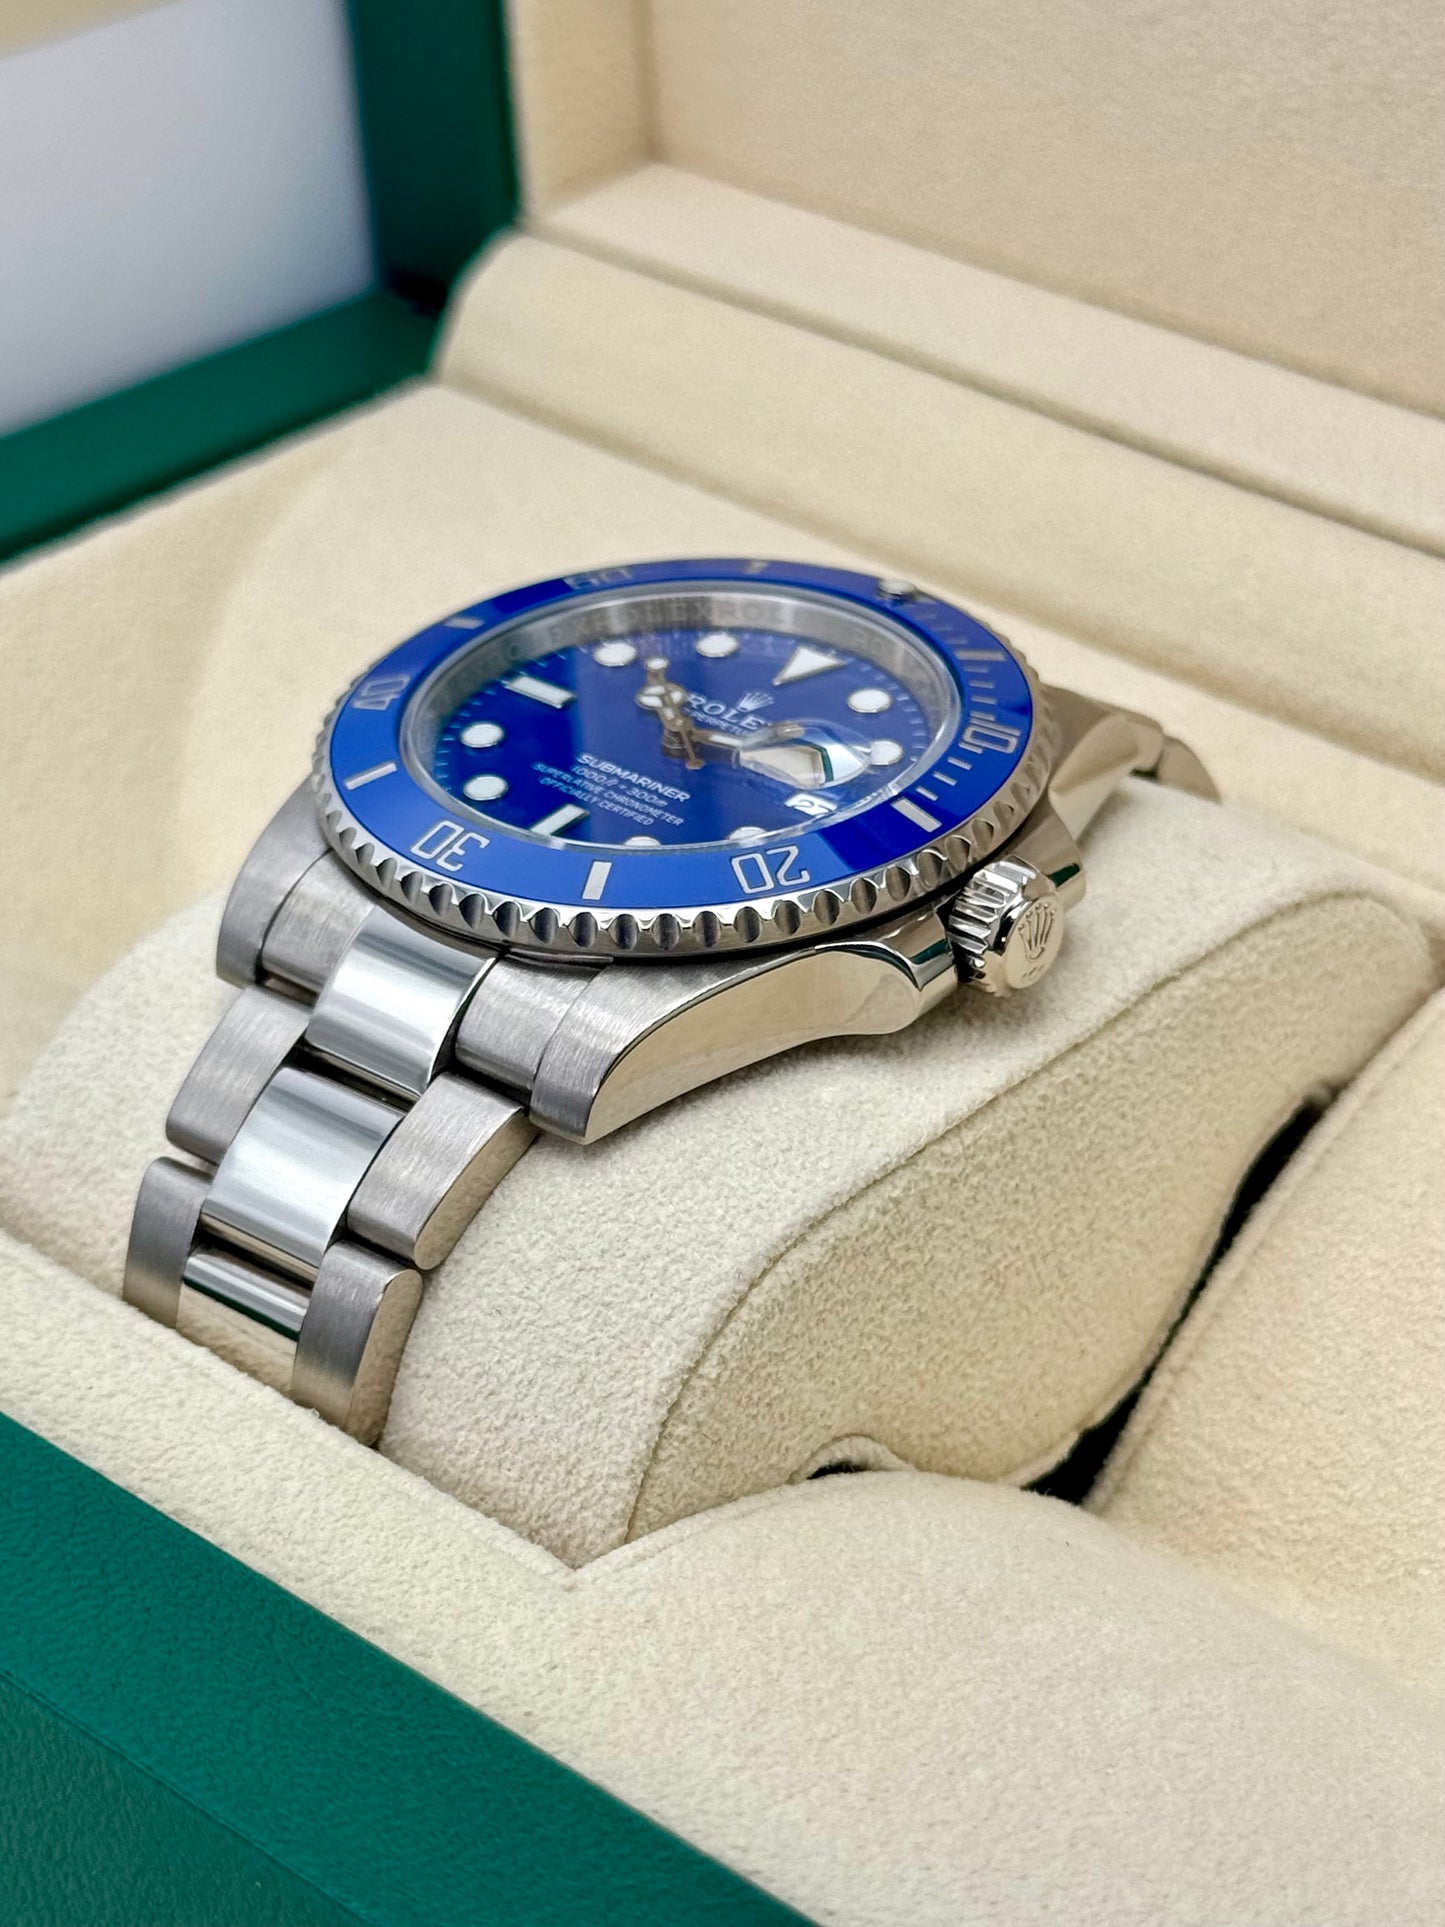 2018 Rolex Submariner "Smurf" 40mm 116619LB White Gold Blue Dial - MyWatchLLC